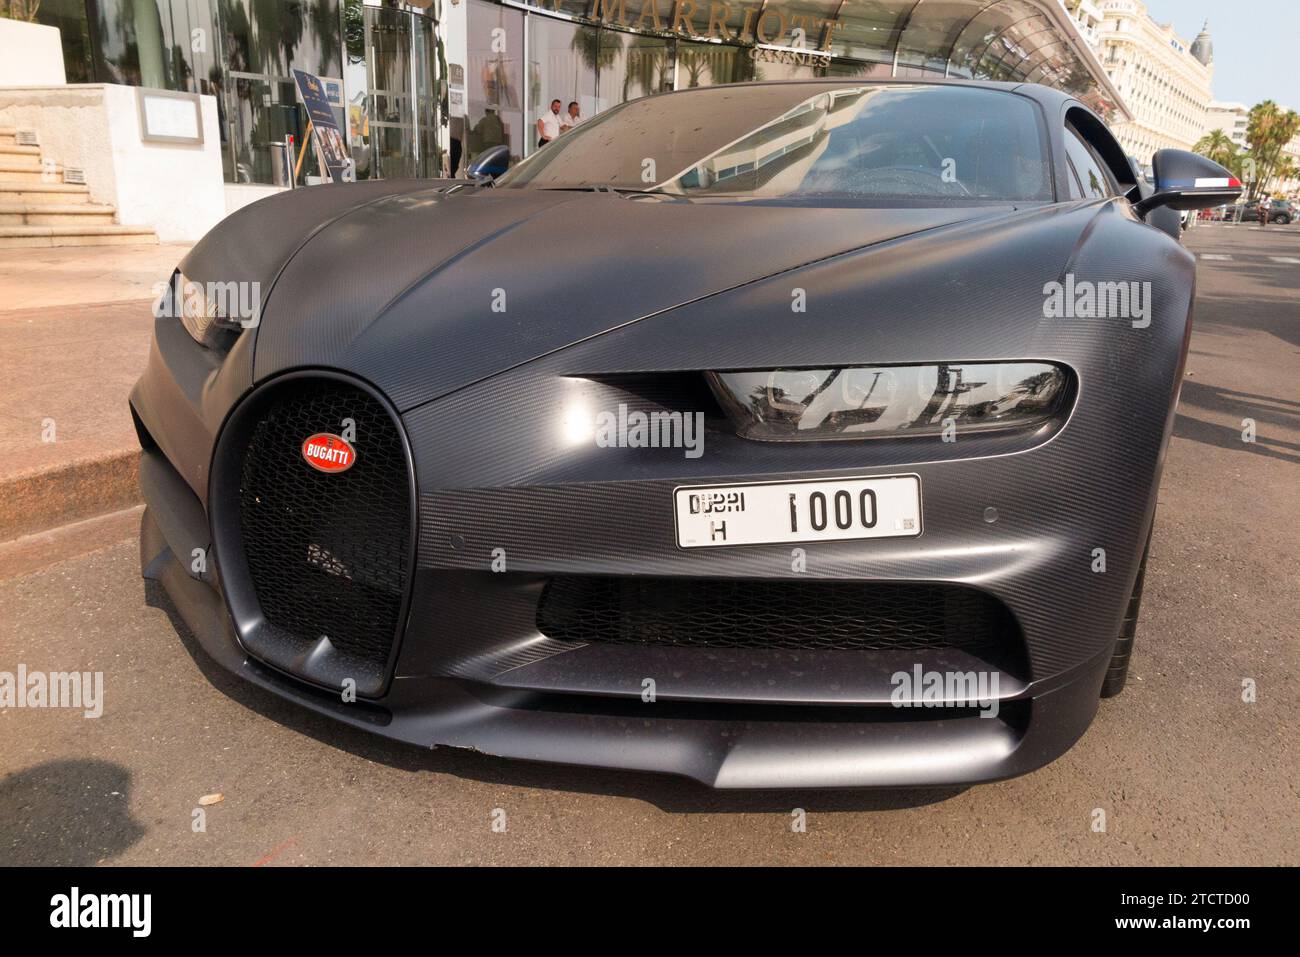 Bugatti Chiron Sport 110 Ans sports car / super car supercar, being admired by locals and tourists while parked Bd boulevard de la Croisette, 06400 Cannes. France. (135) Stock Photo